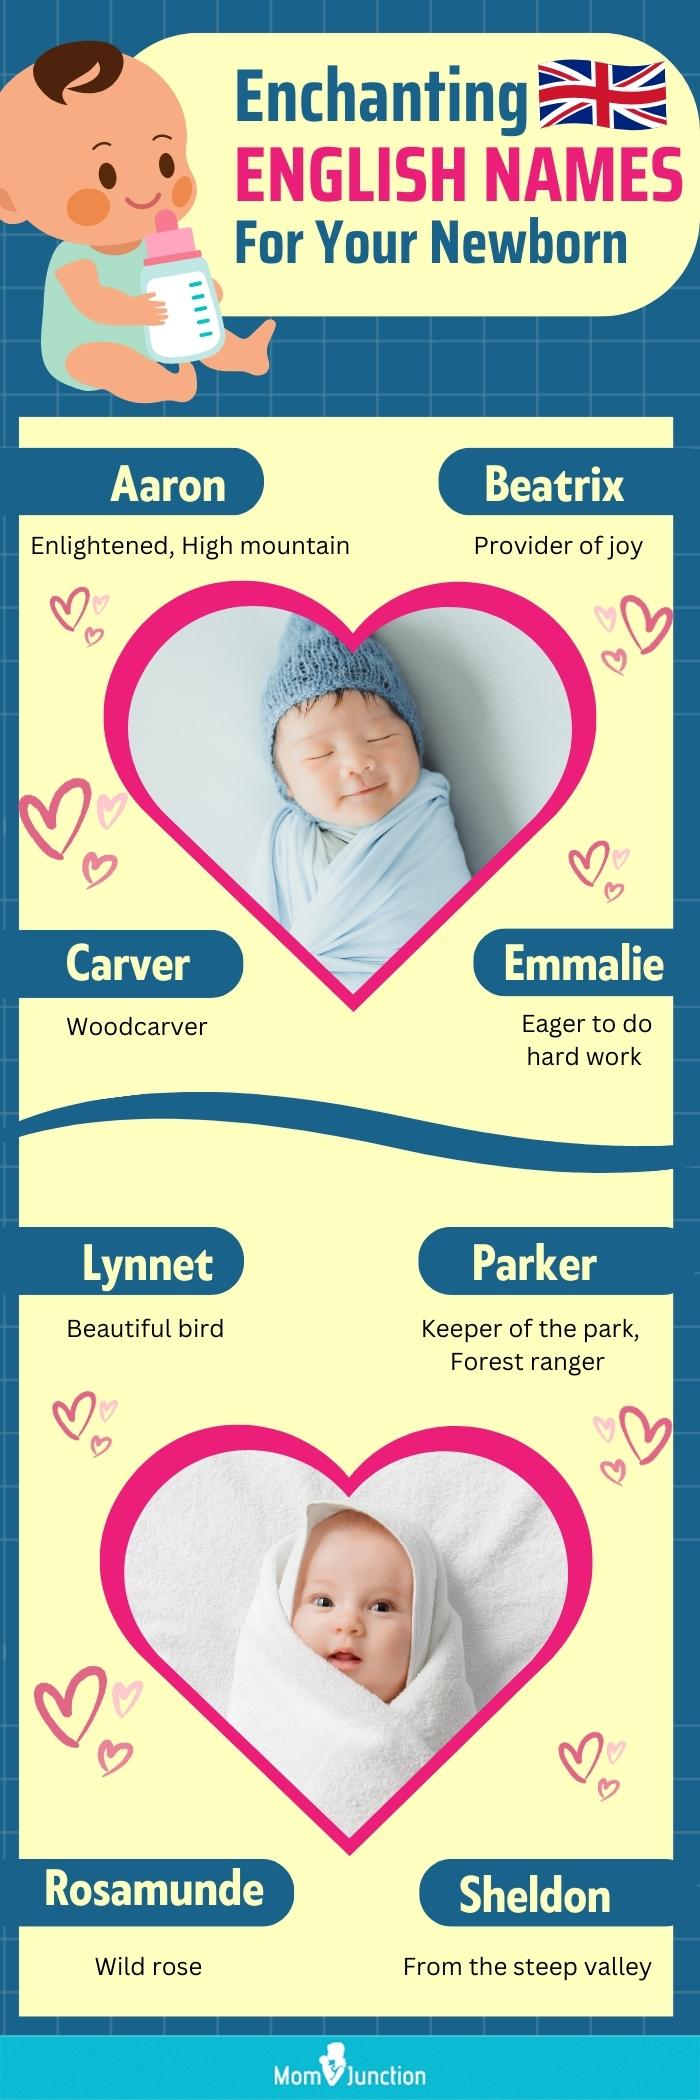 enchanting english names for your newborn (infographic)